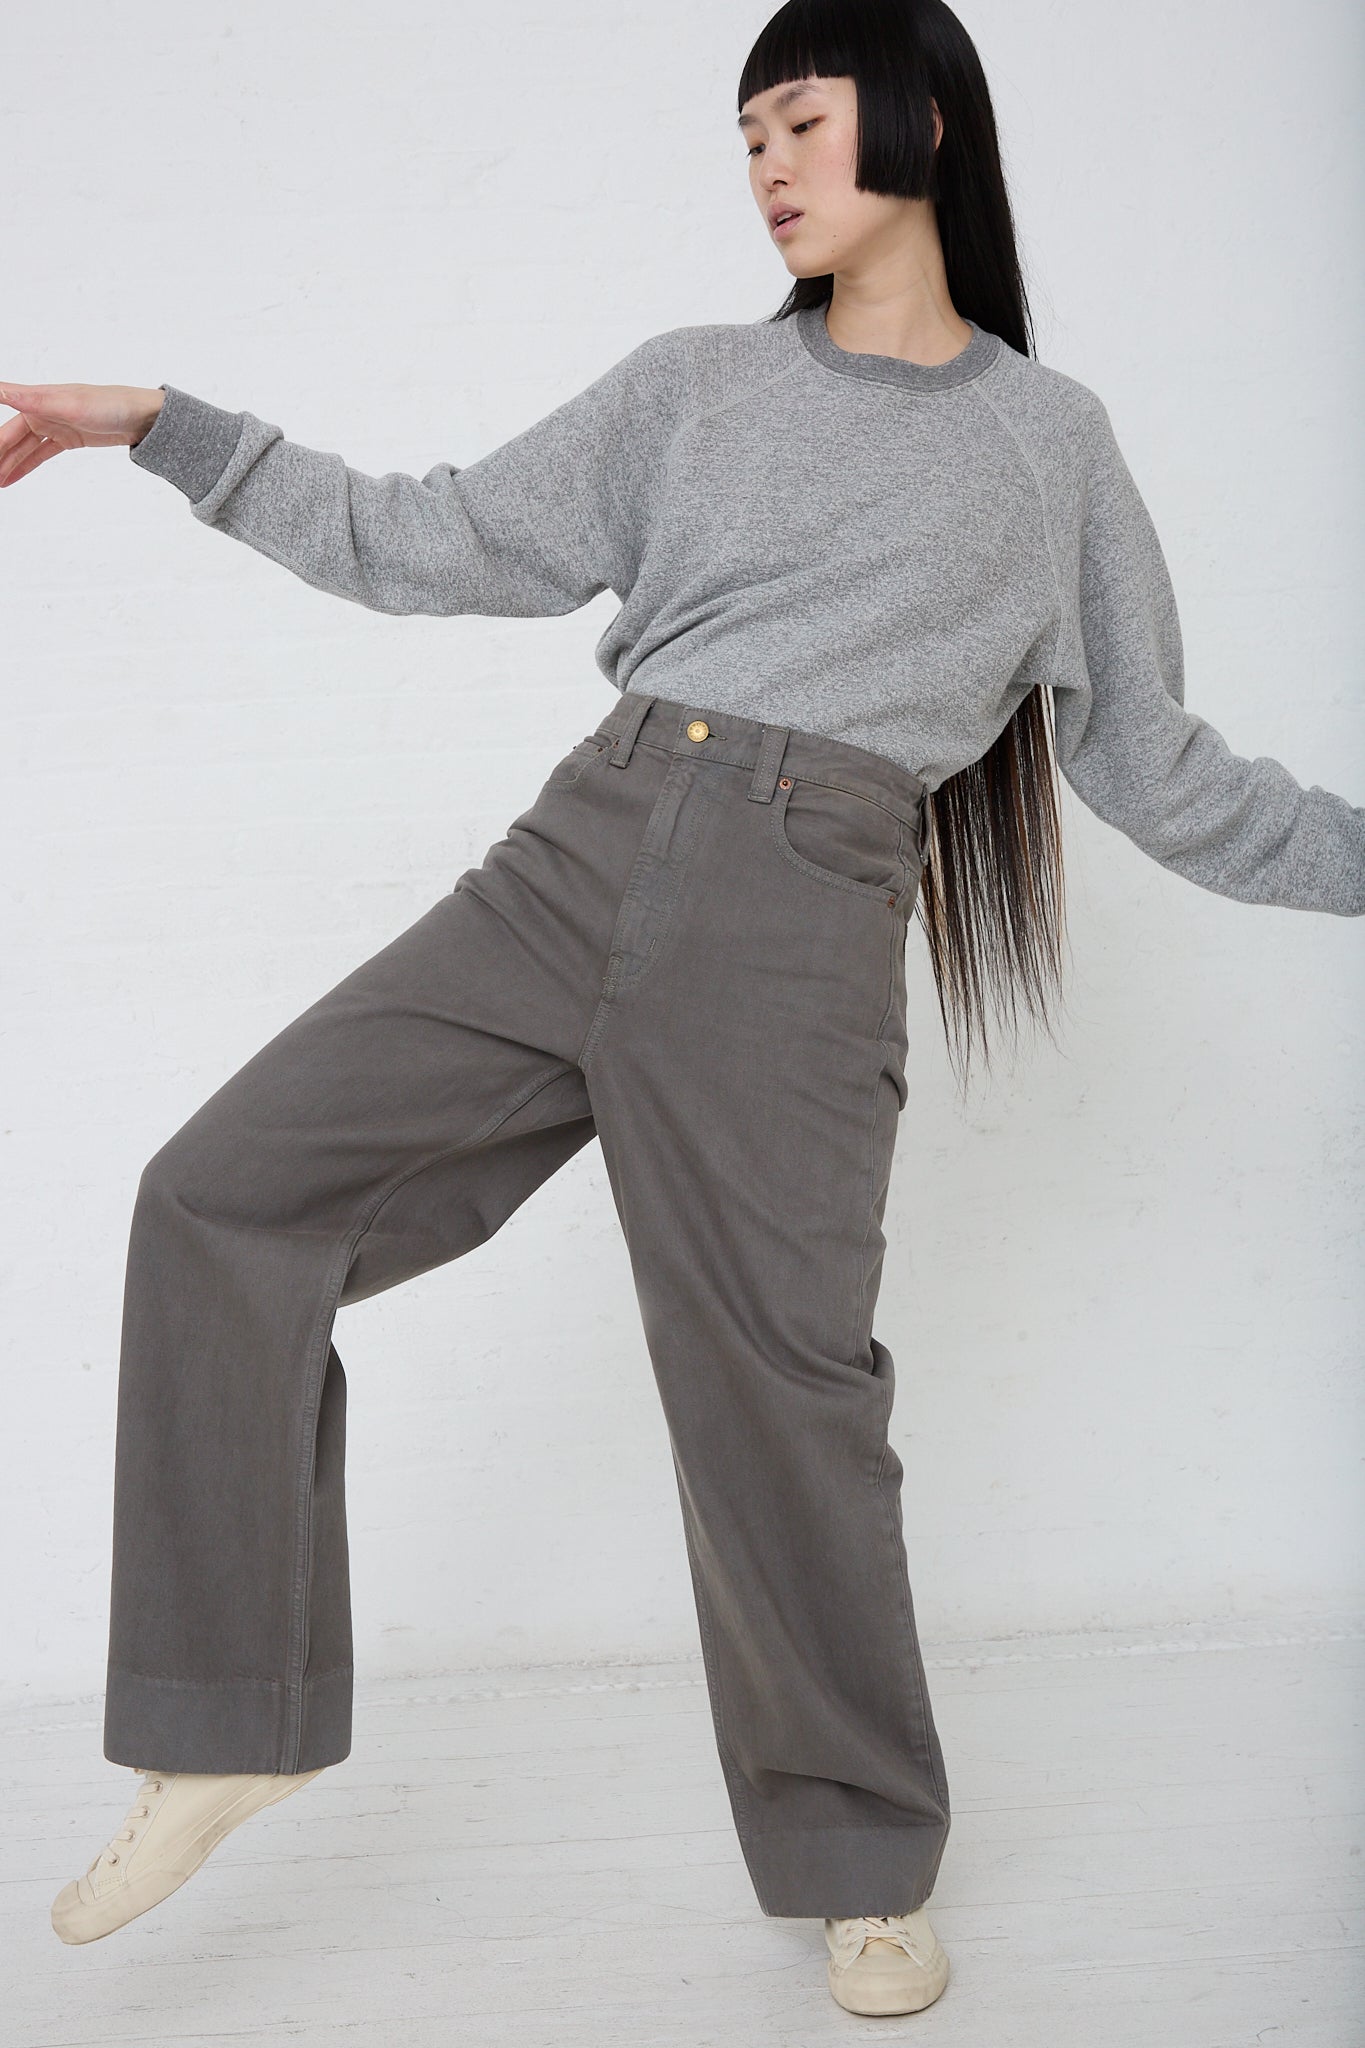 A woman wearing B Sides Easy Mid Relaxed Jean in Olive Overdye wide leg pants.